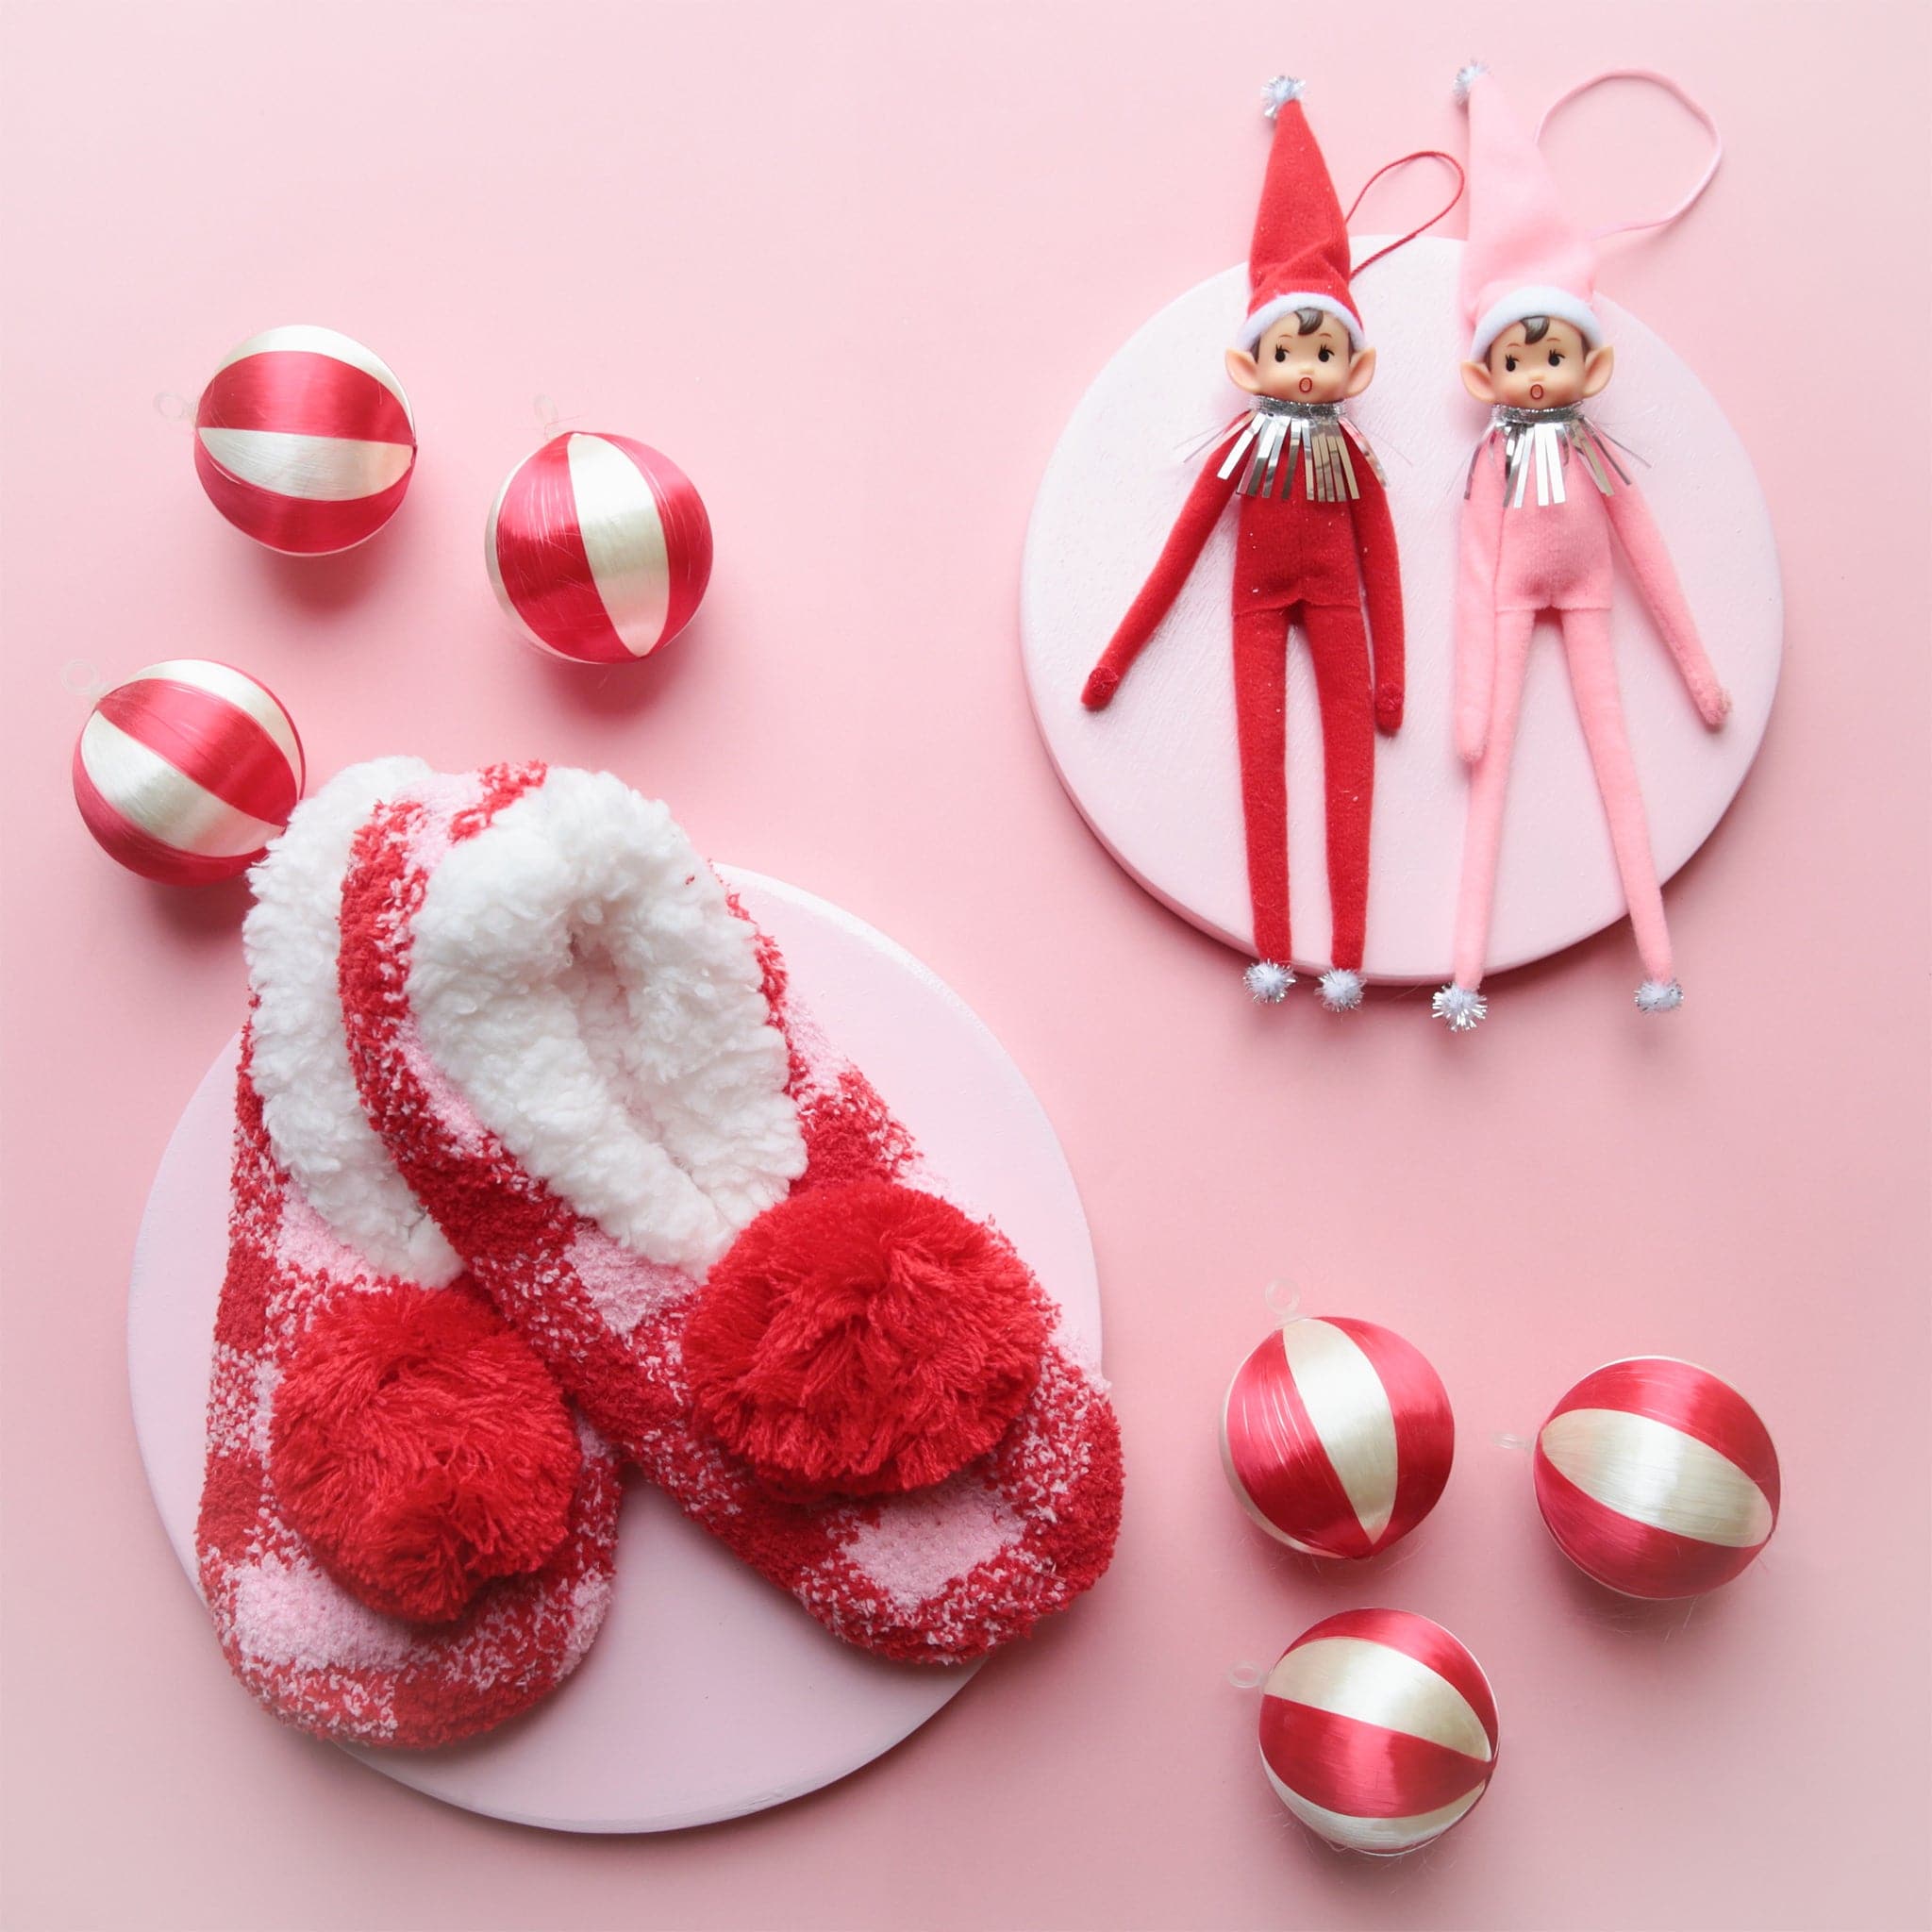 An elf ornament with long arms and legs with a pink suit and hat on as well as a pink string loop for hanging and photographed here next to the red version. 